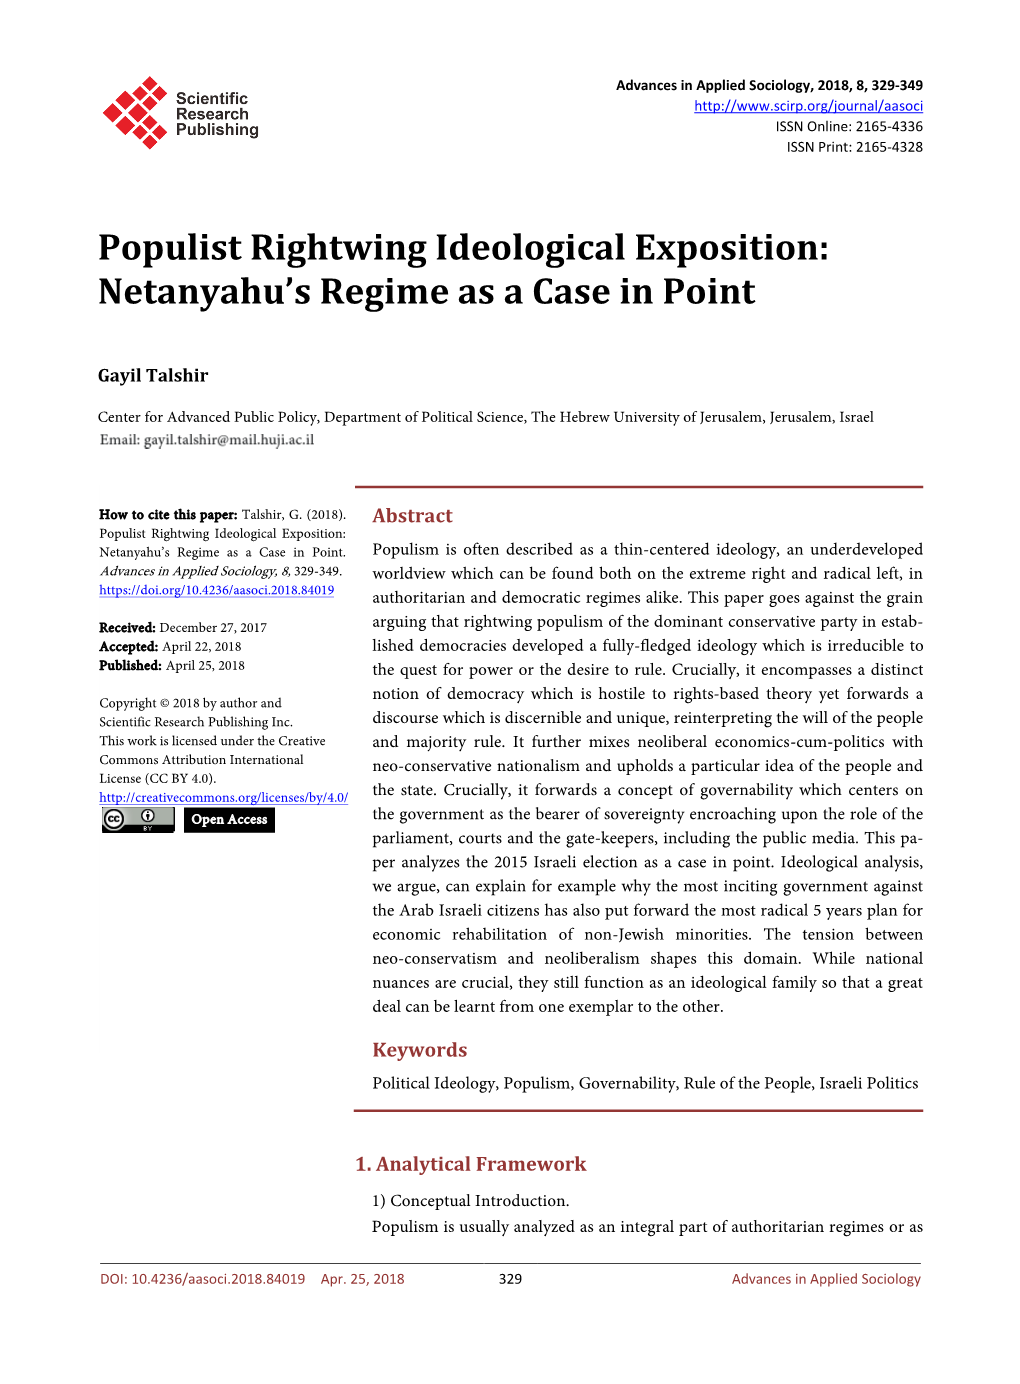 Populist Rightwing Ideological Exposition: Netanyahu's Regime As